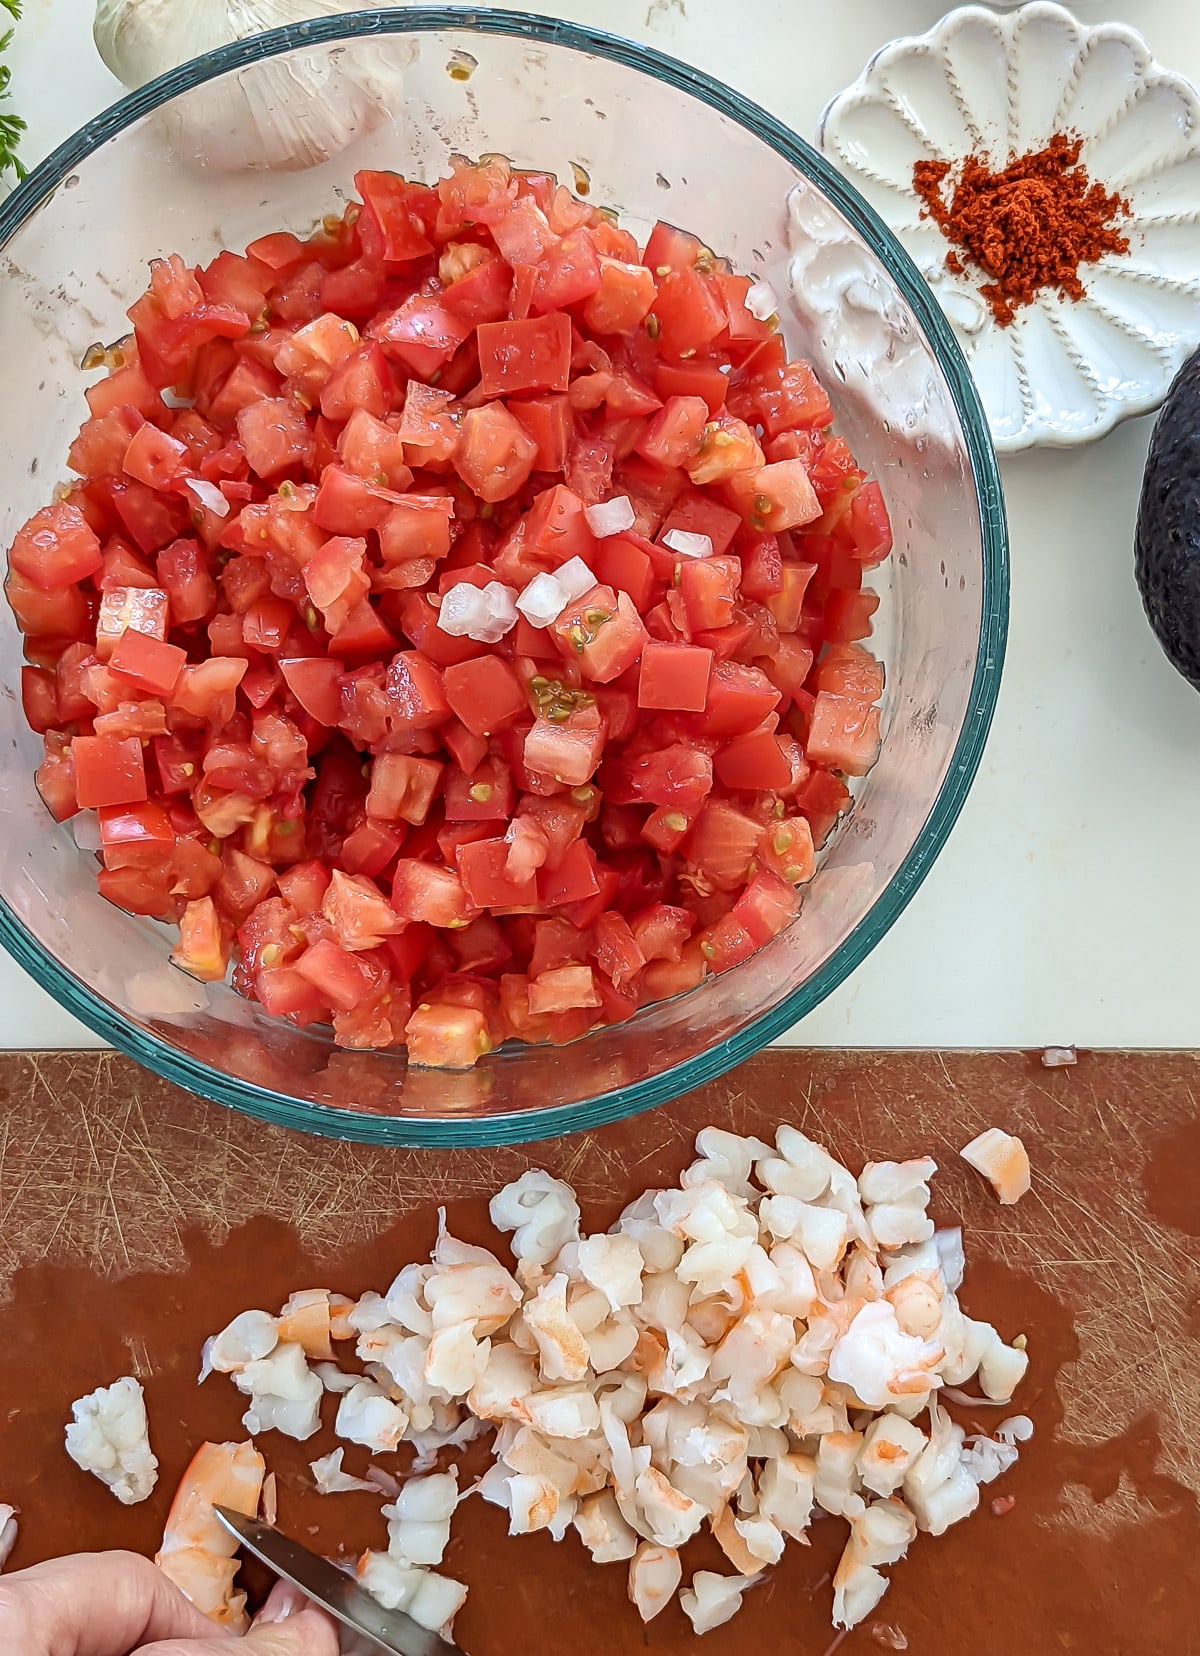 Diced tomatoes and diced shrimp.